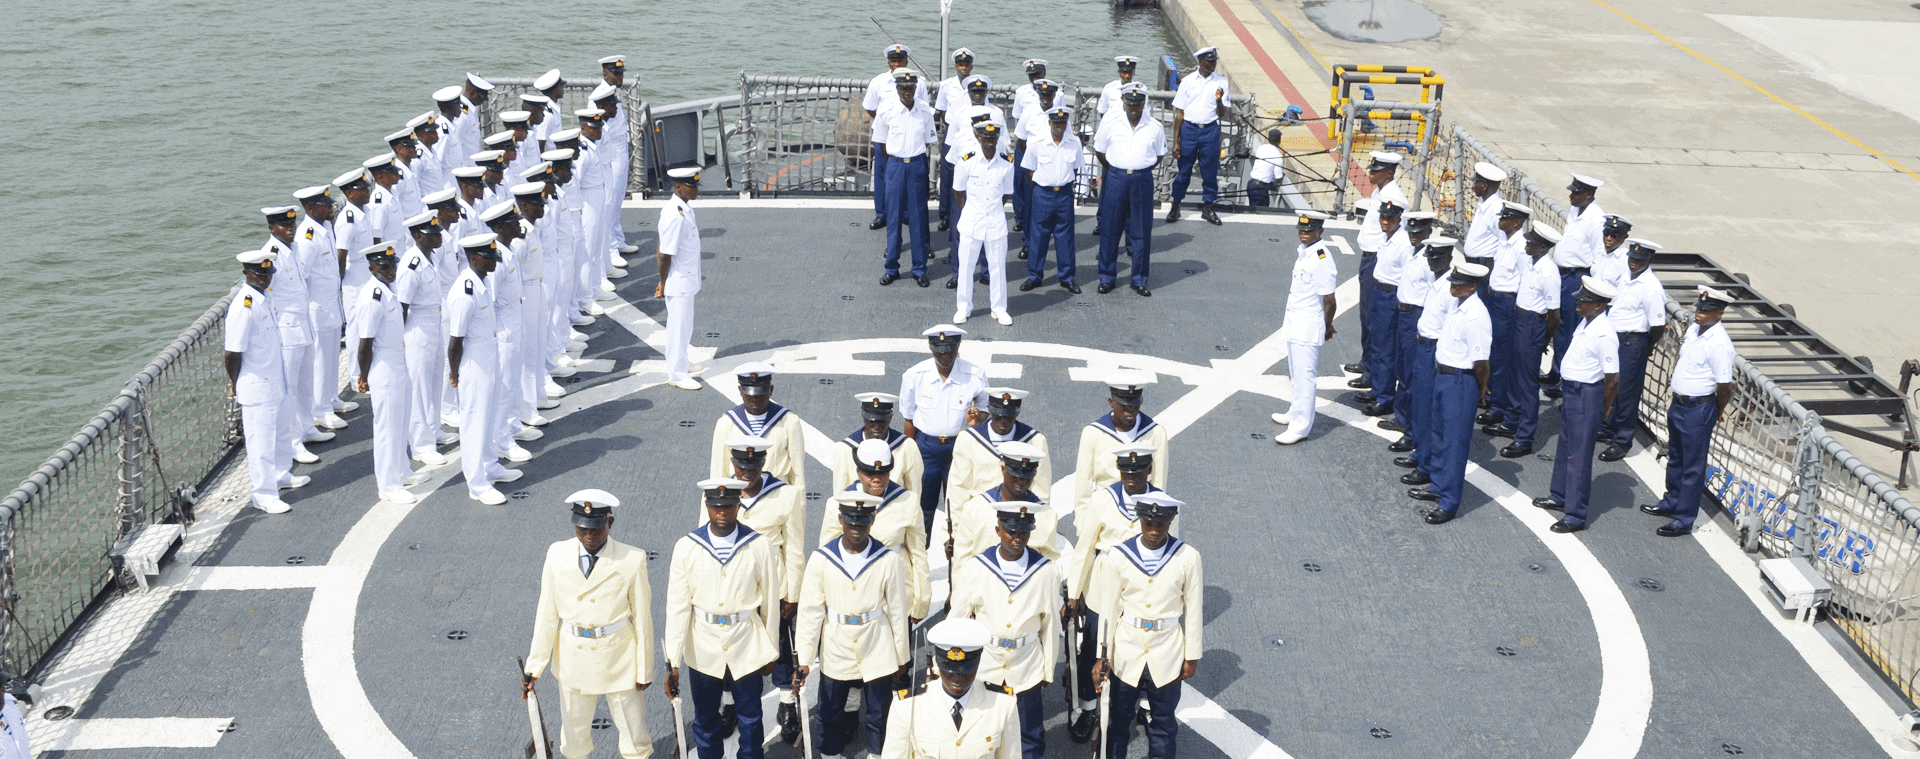 Nigerian Navy Examination Questions Free Study Guide 2021